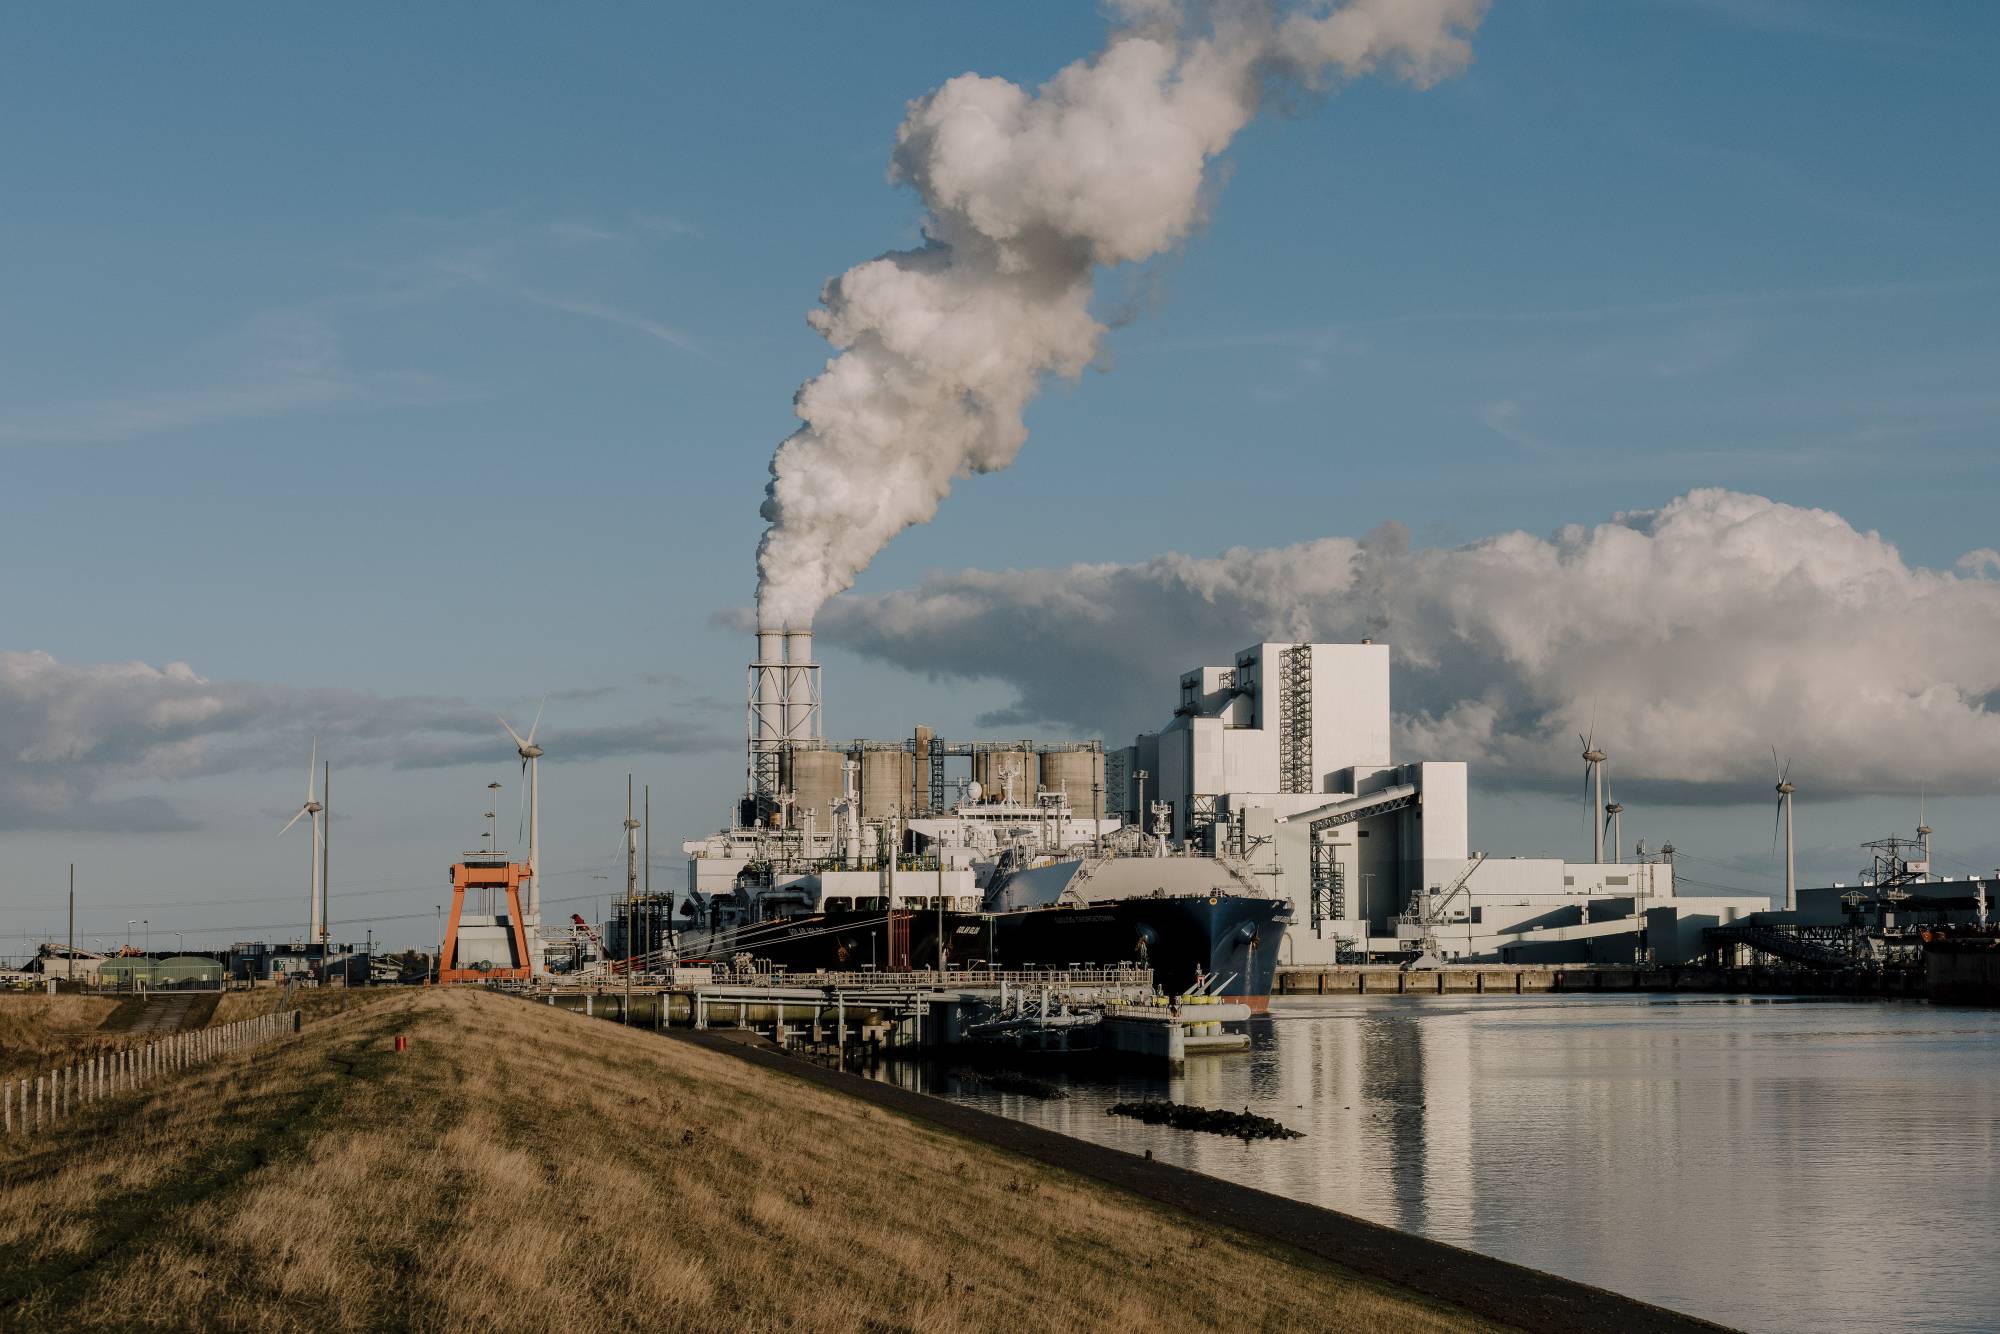 A liquefied natural gas terminal, and power plant beyond, at the Eemshaven port in the Netherlands | ILVY NJIOKIKTJIEN / THE NEW YORK TIMES